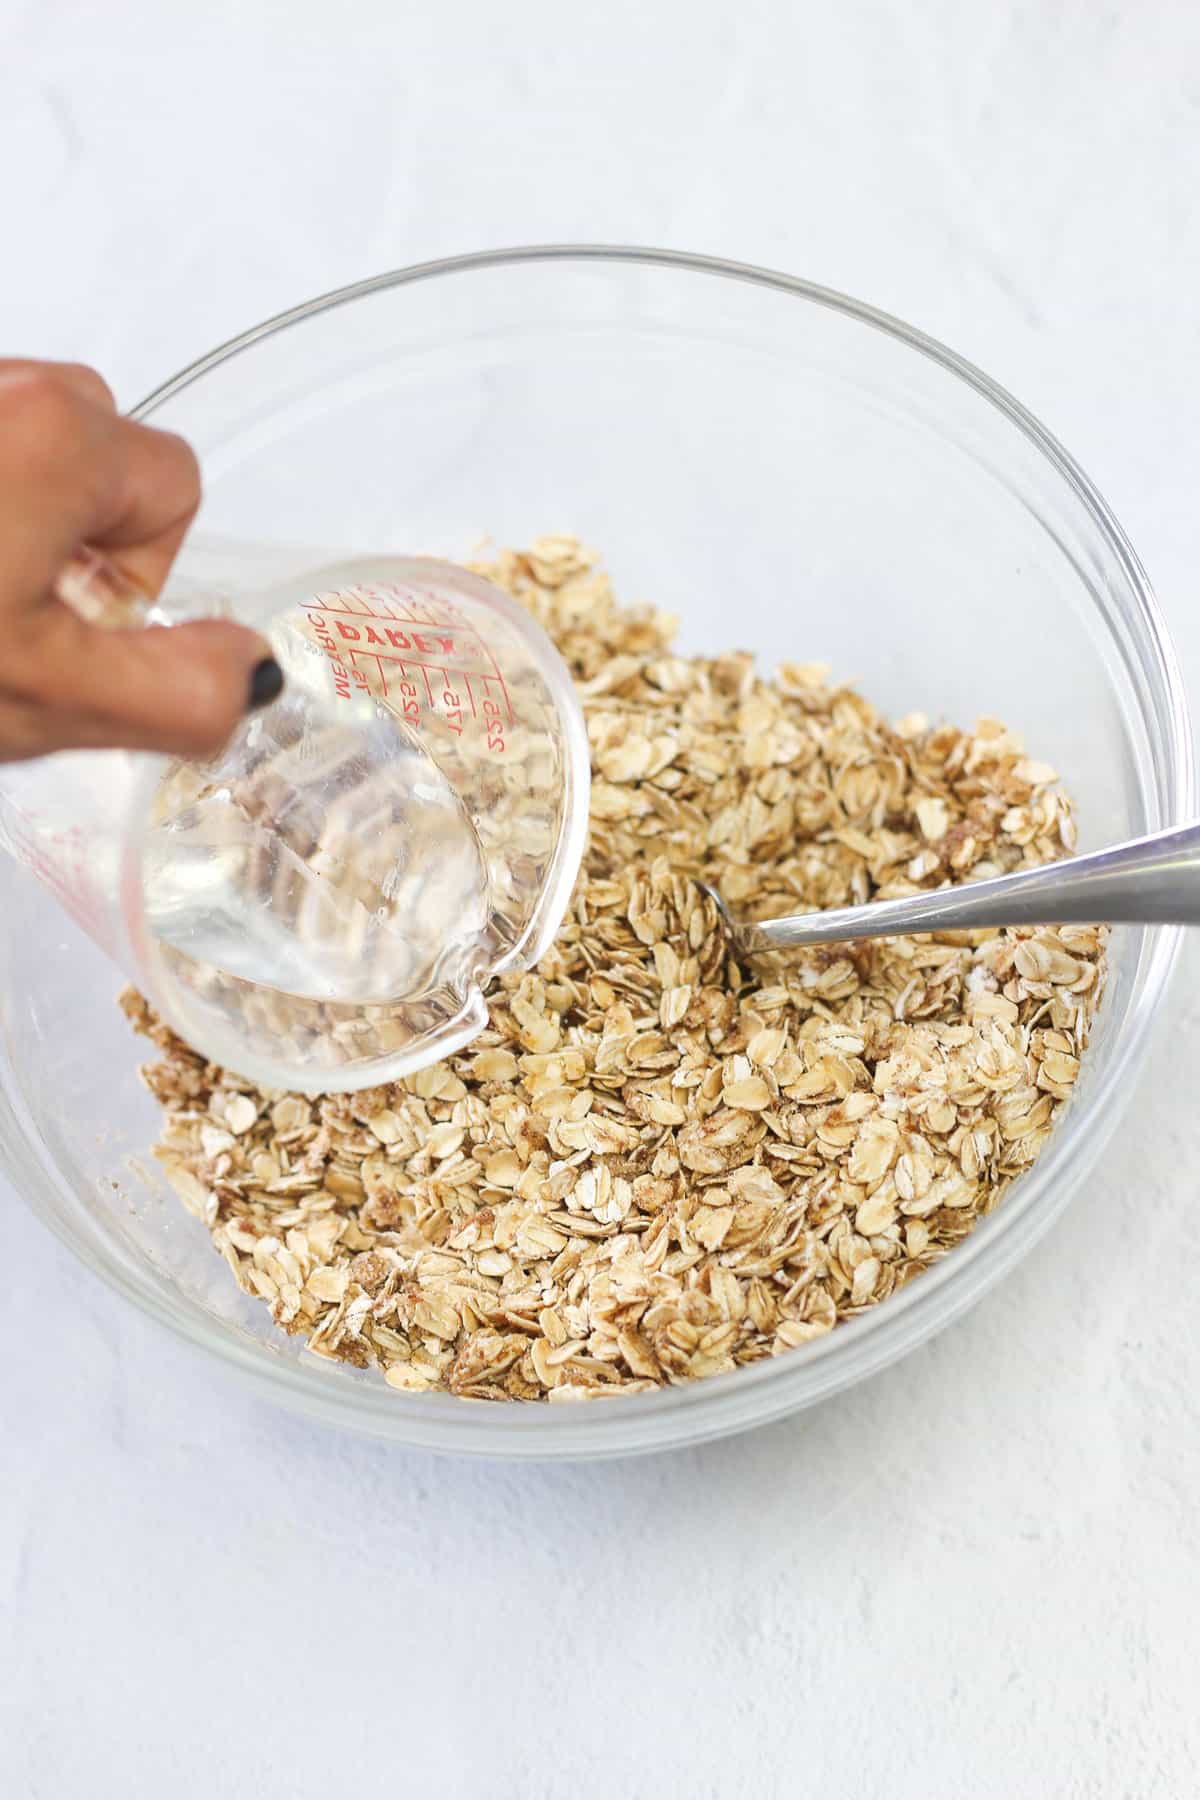 A hand pouring coconut oil into a mixing bowl of dry ingredients for baked oatmeal.